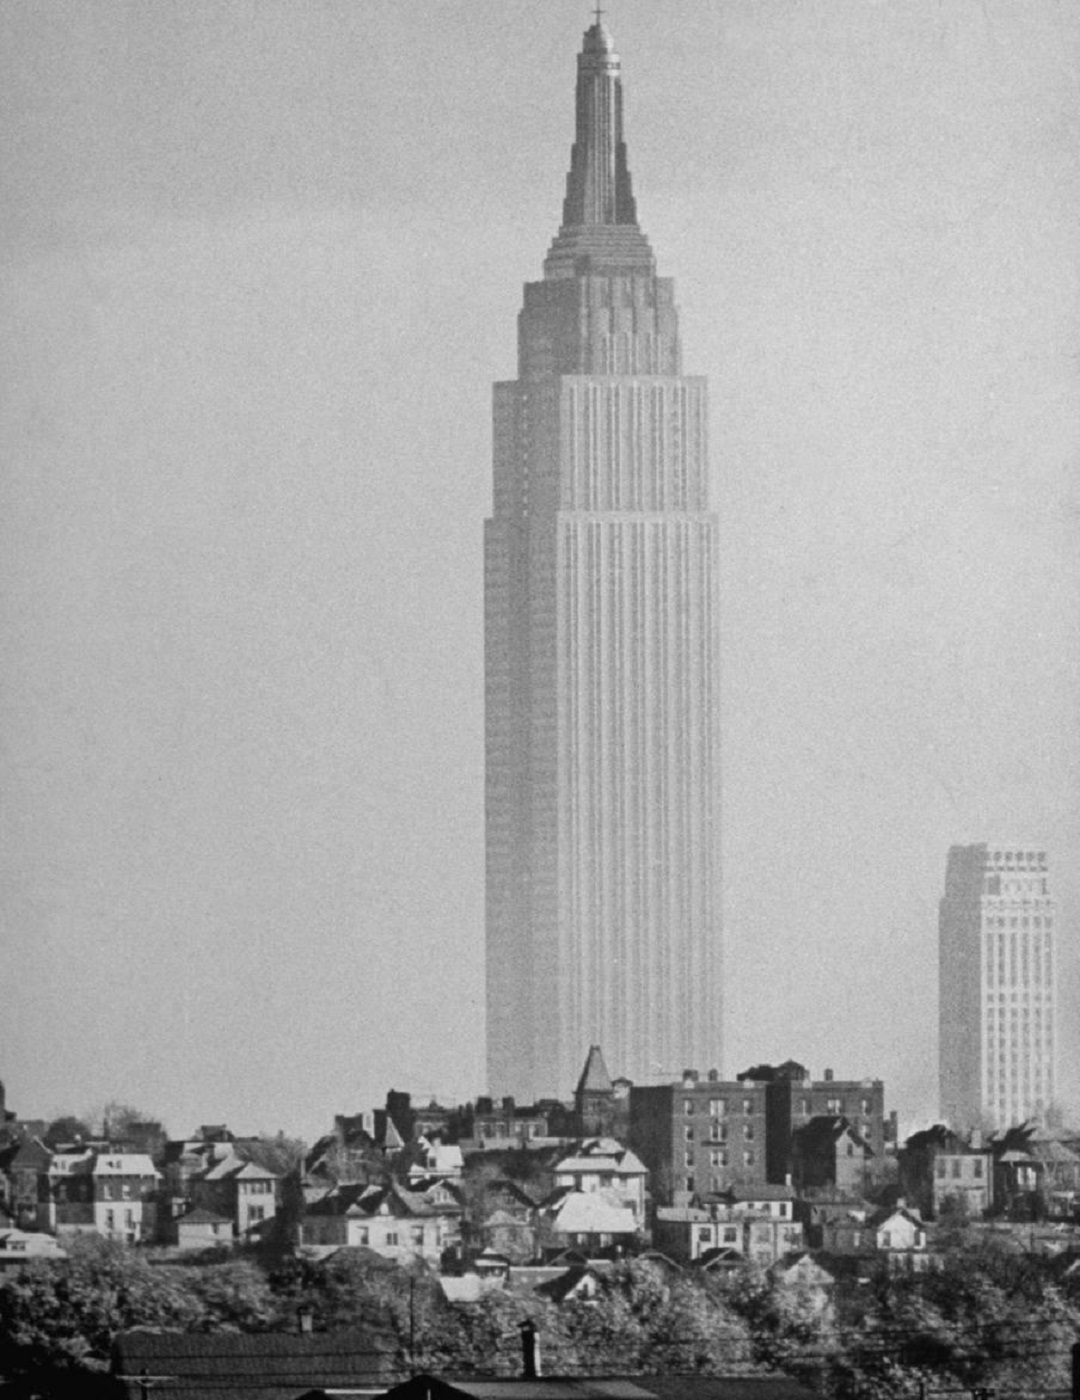 This Image Of The Empire State Building Taken In New Jersey Makes Me Feel Strange